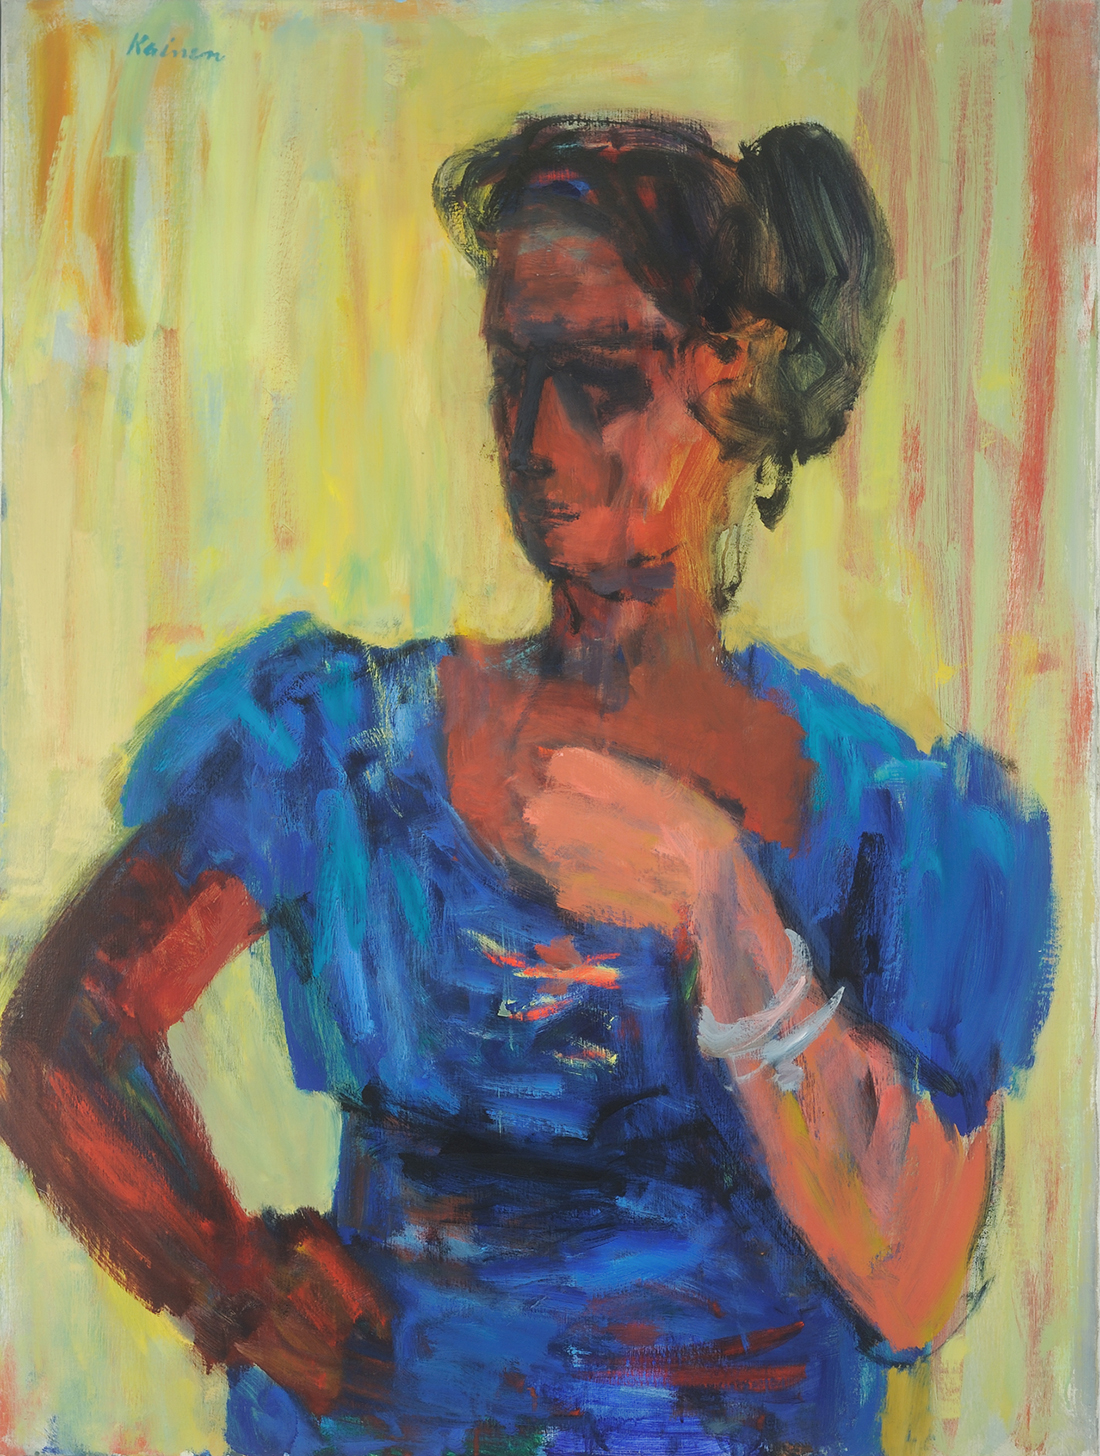 Woman with Yellow Background, Jacob Kainen, 1959